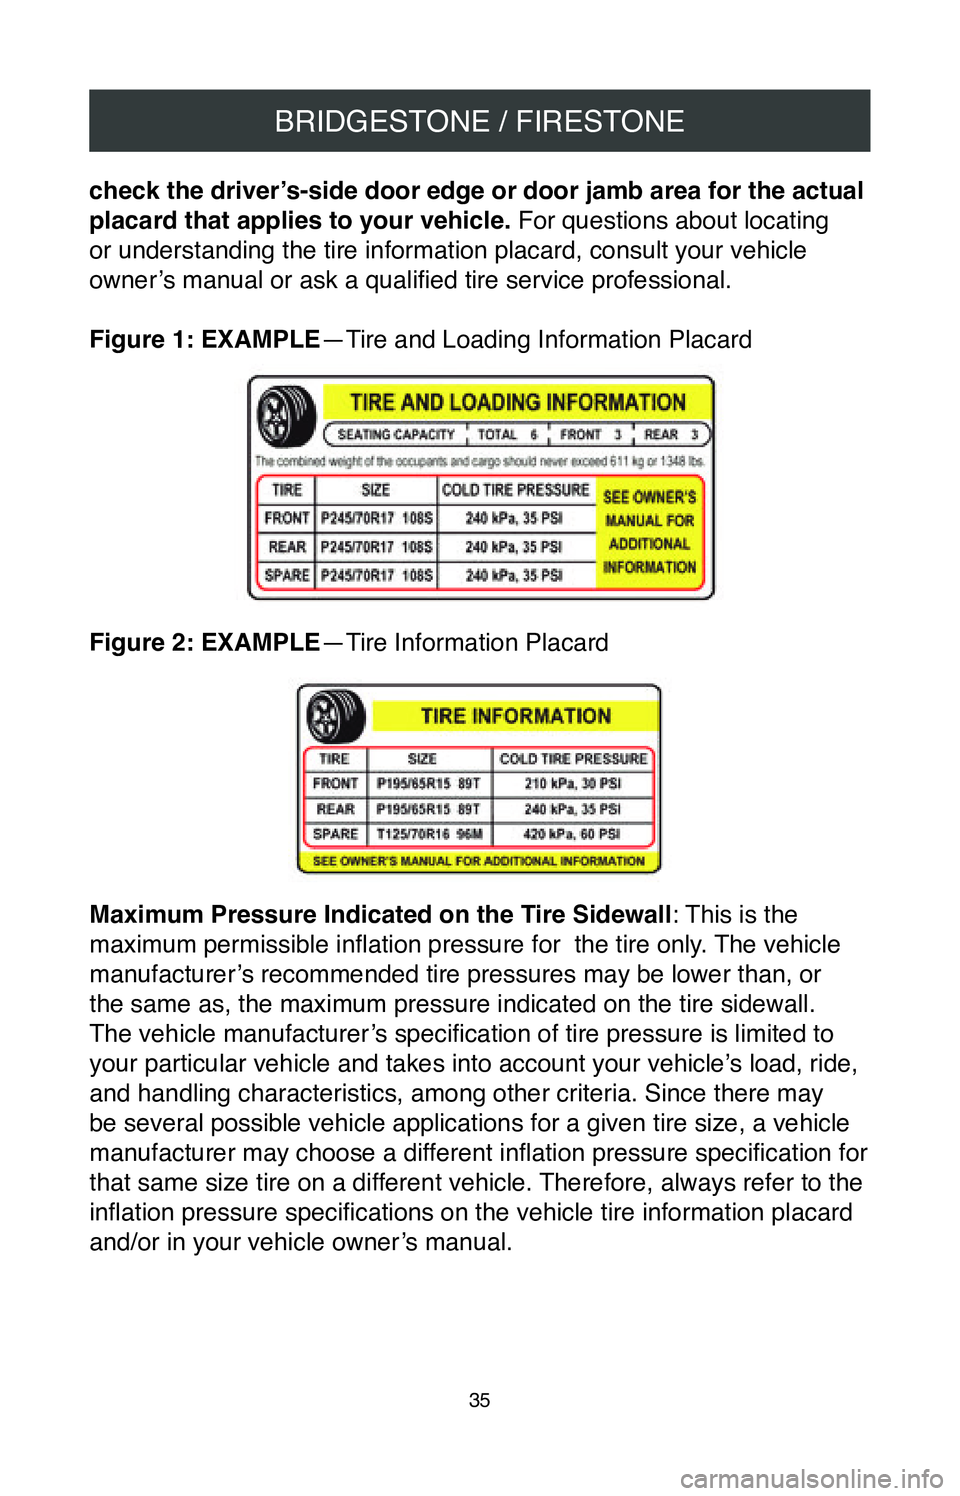 TOYOTA MIRAI 2020  Warranties & Maintenance Guides (in English) BRIDGESTONE / FIRESTONE
35
check the driver’s-side door edge or door jamb area for the actual 
placard that applies to your vehicle. For questions about locating 
or understanding the tire informati